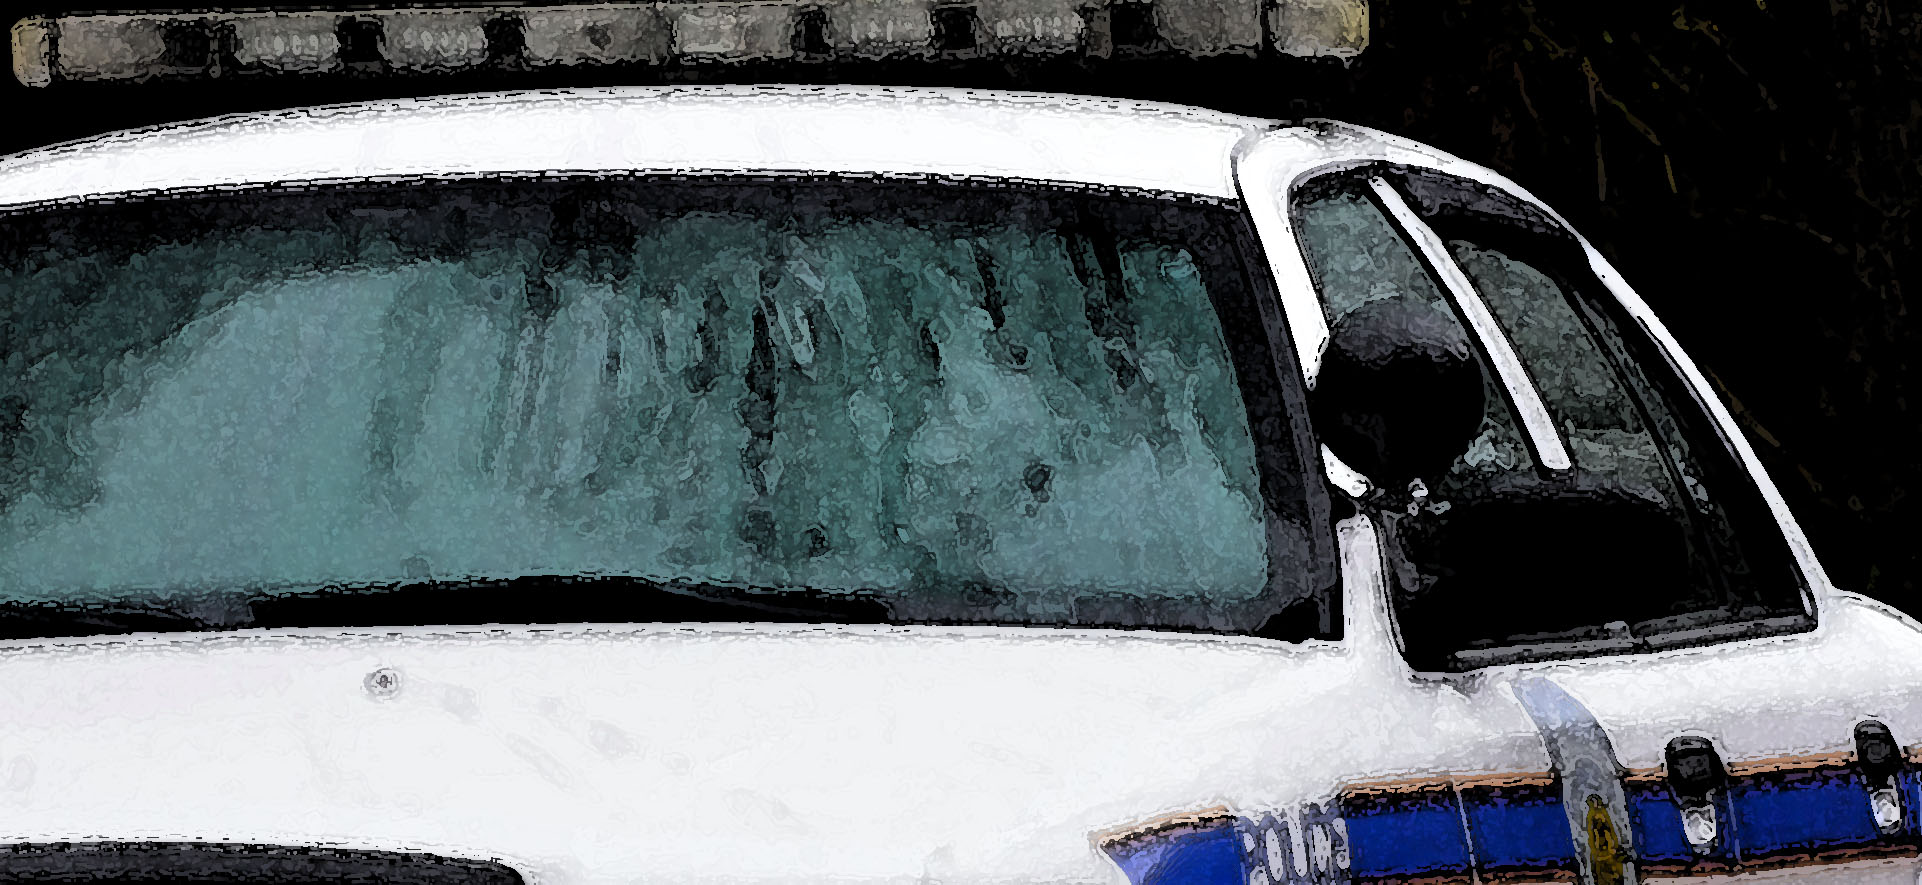 watercolor police vehicle detail - all rights reserved Ernest J. Bordini, Ph.D.